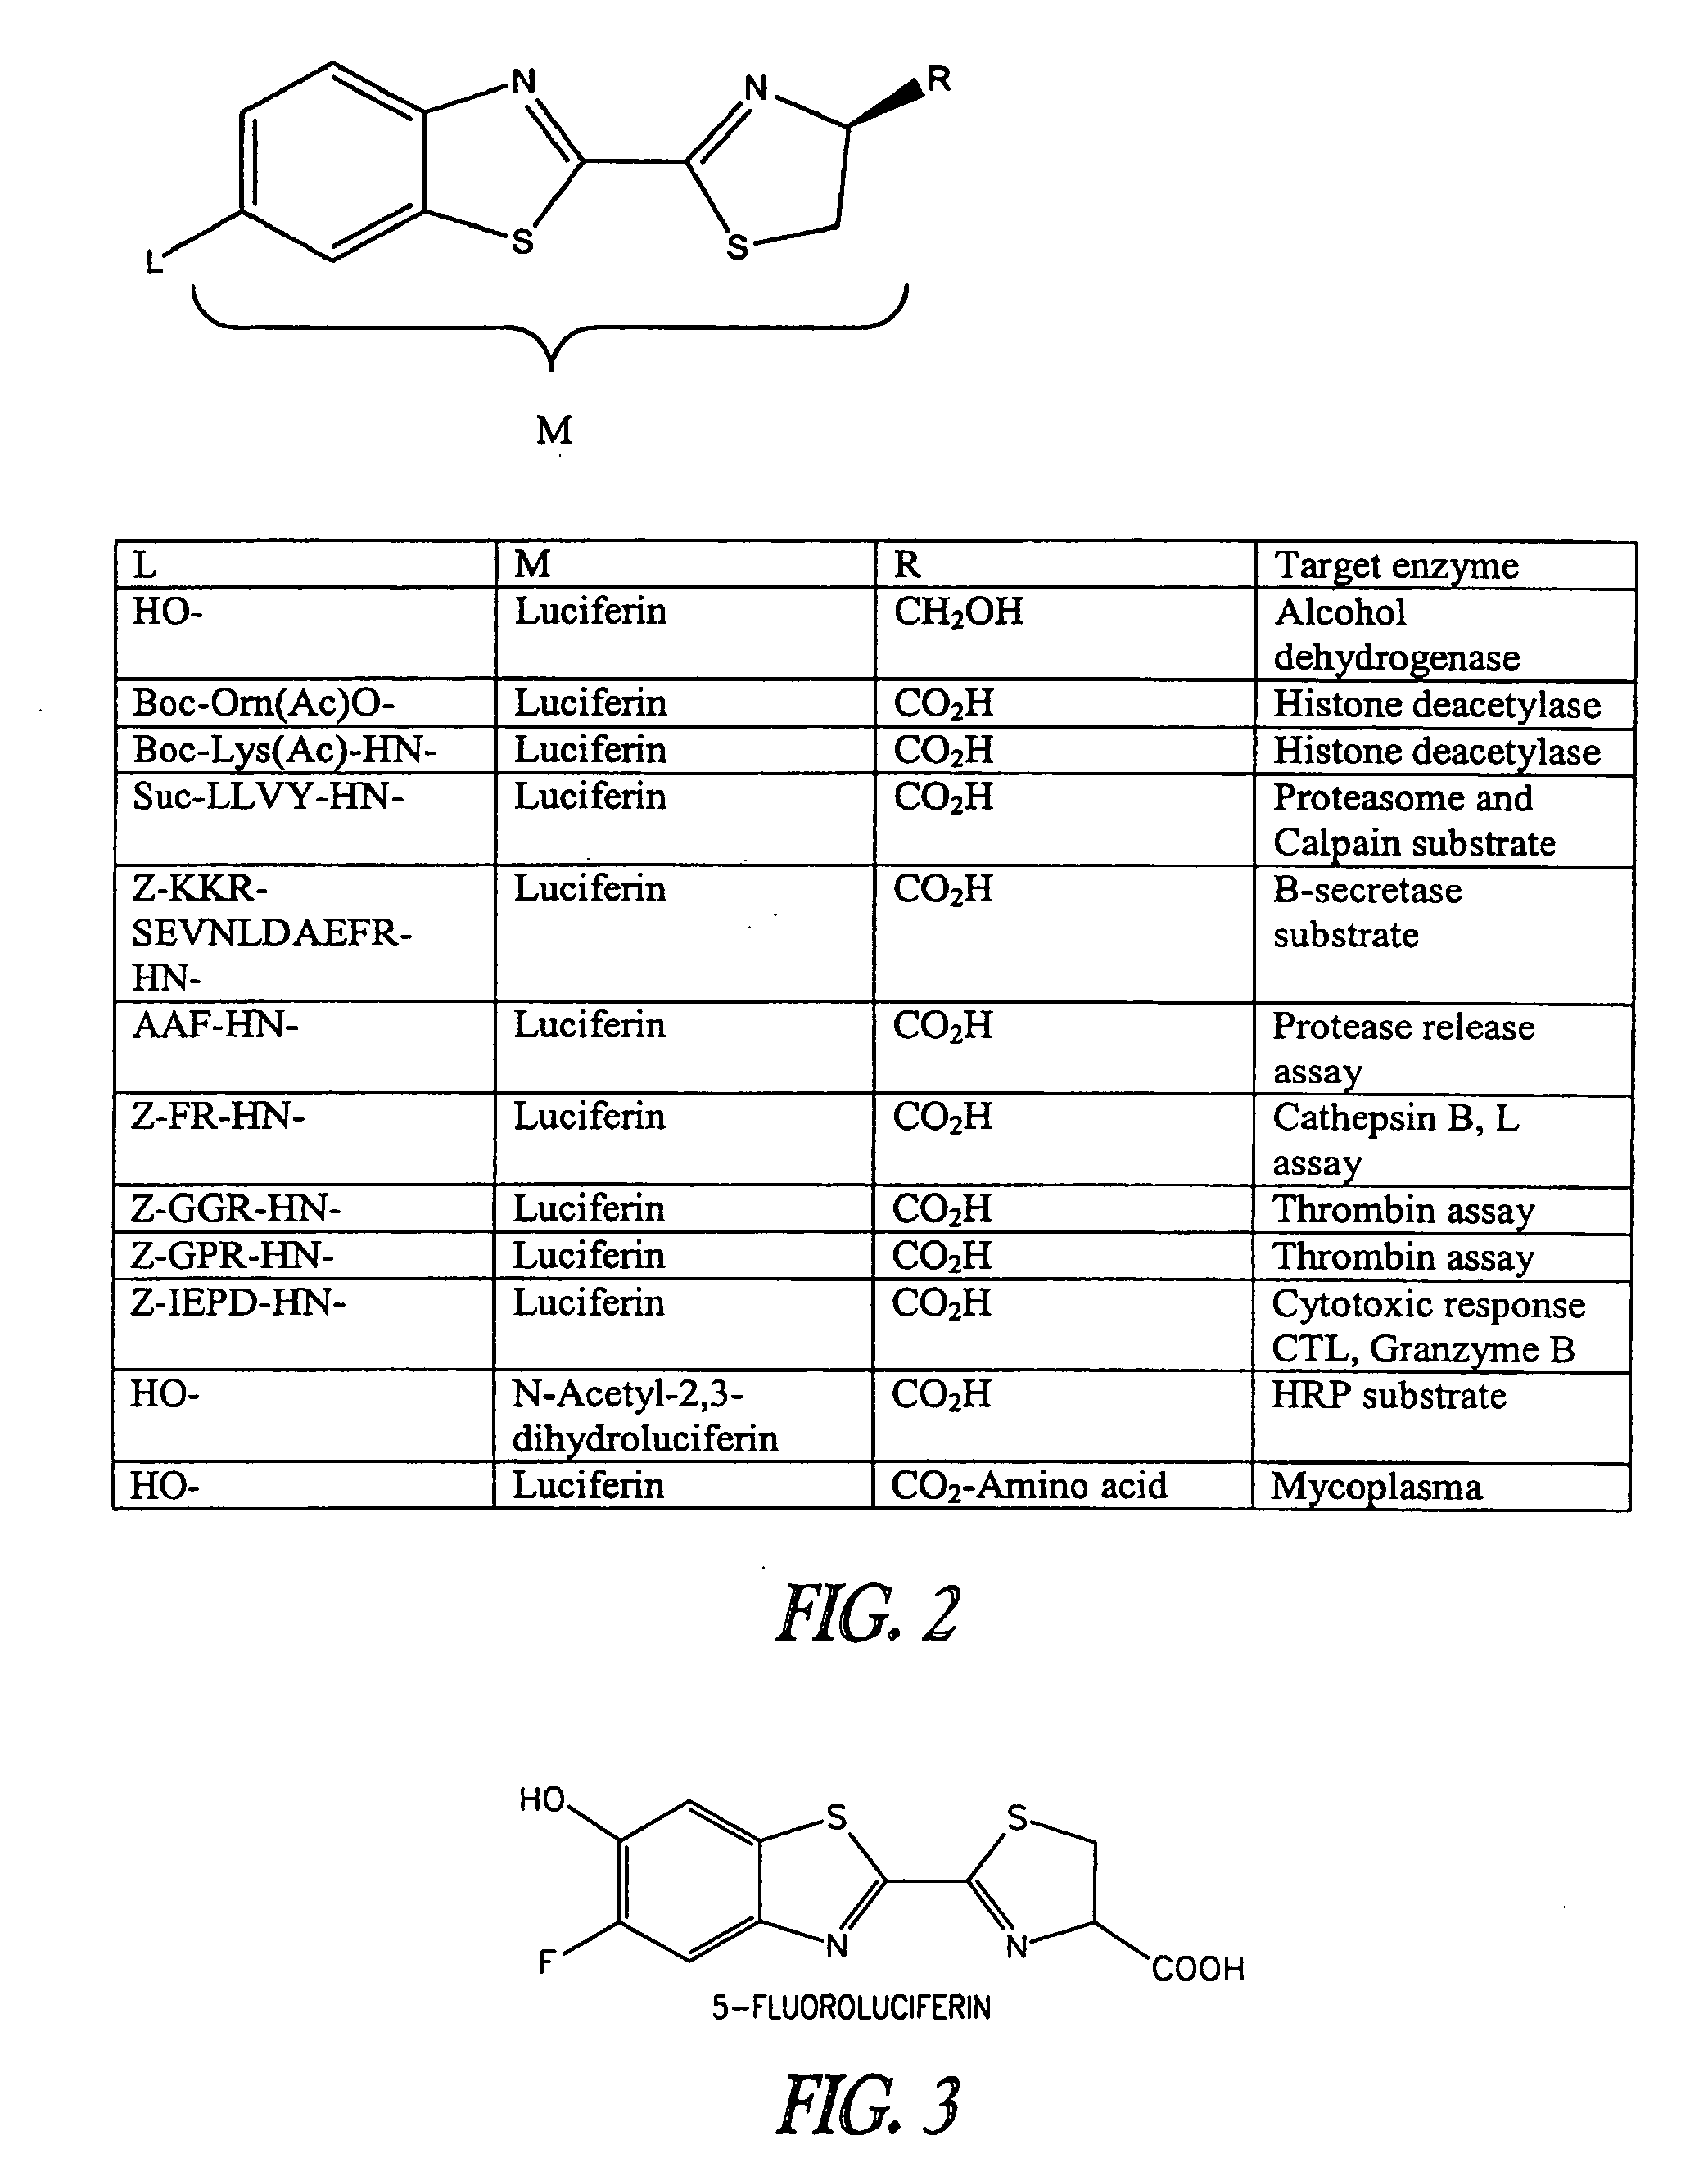 Luminogenic and fluorogenic compounds and methods to detect molecules or conditions